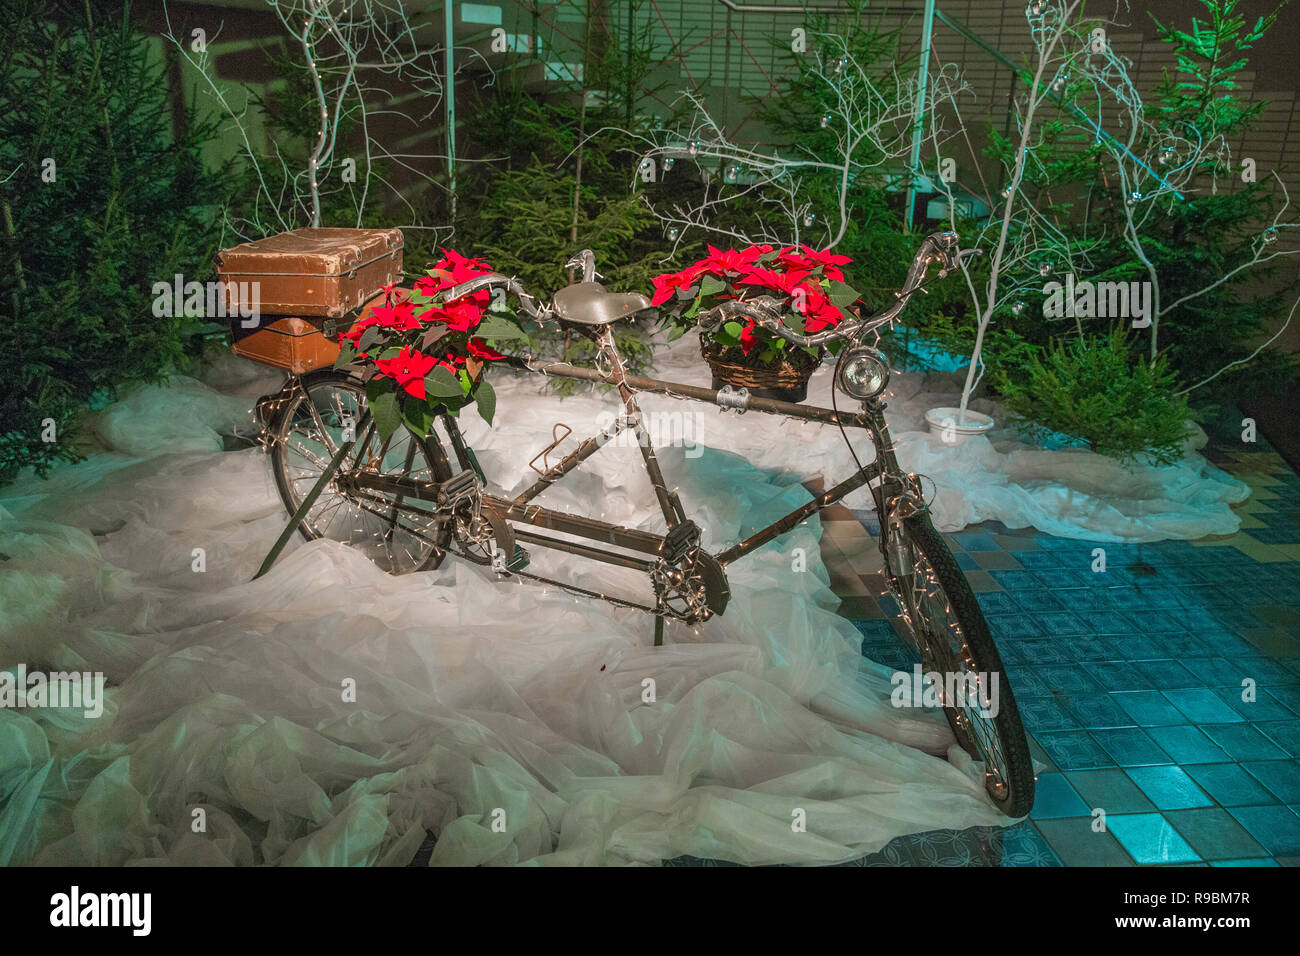 City Cesis, Latvia. Old retro tandem bicycle and christmas decors, red flowers. Travel photo 2018. december. Stock Photo